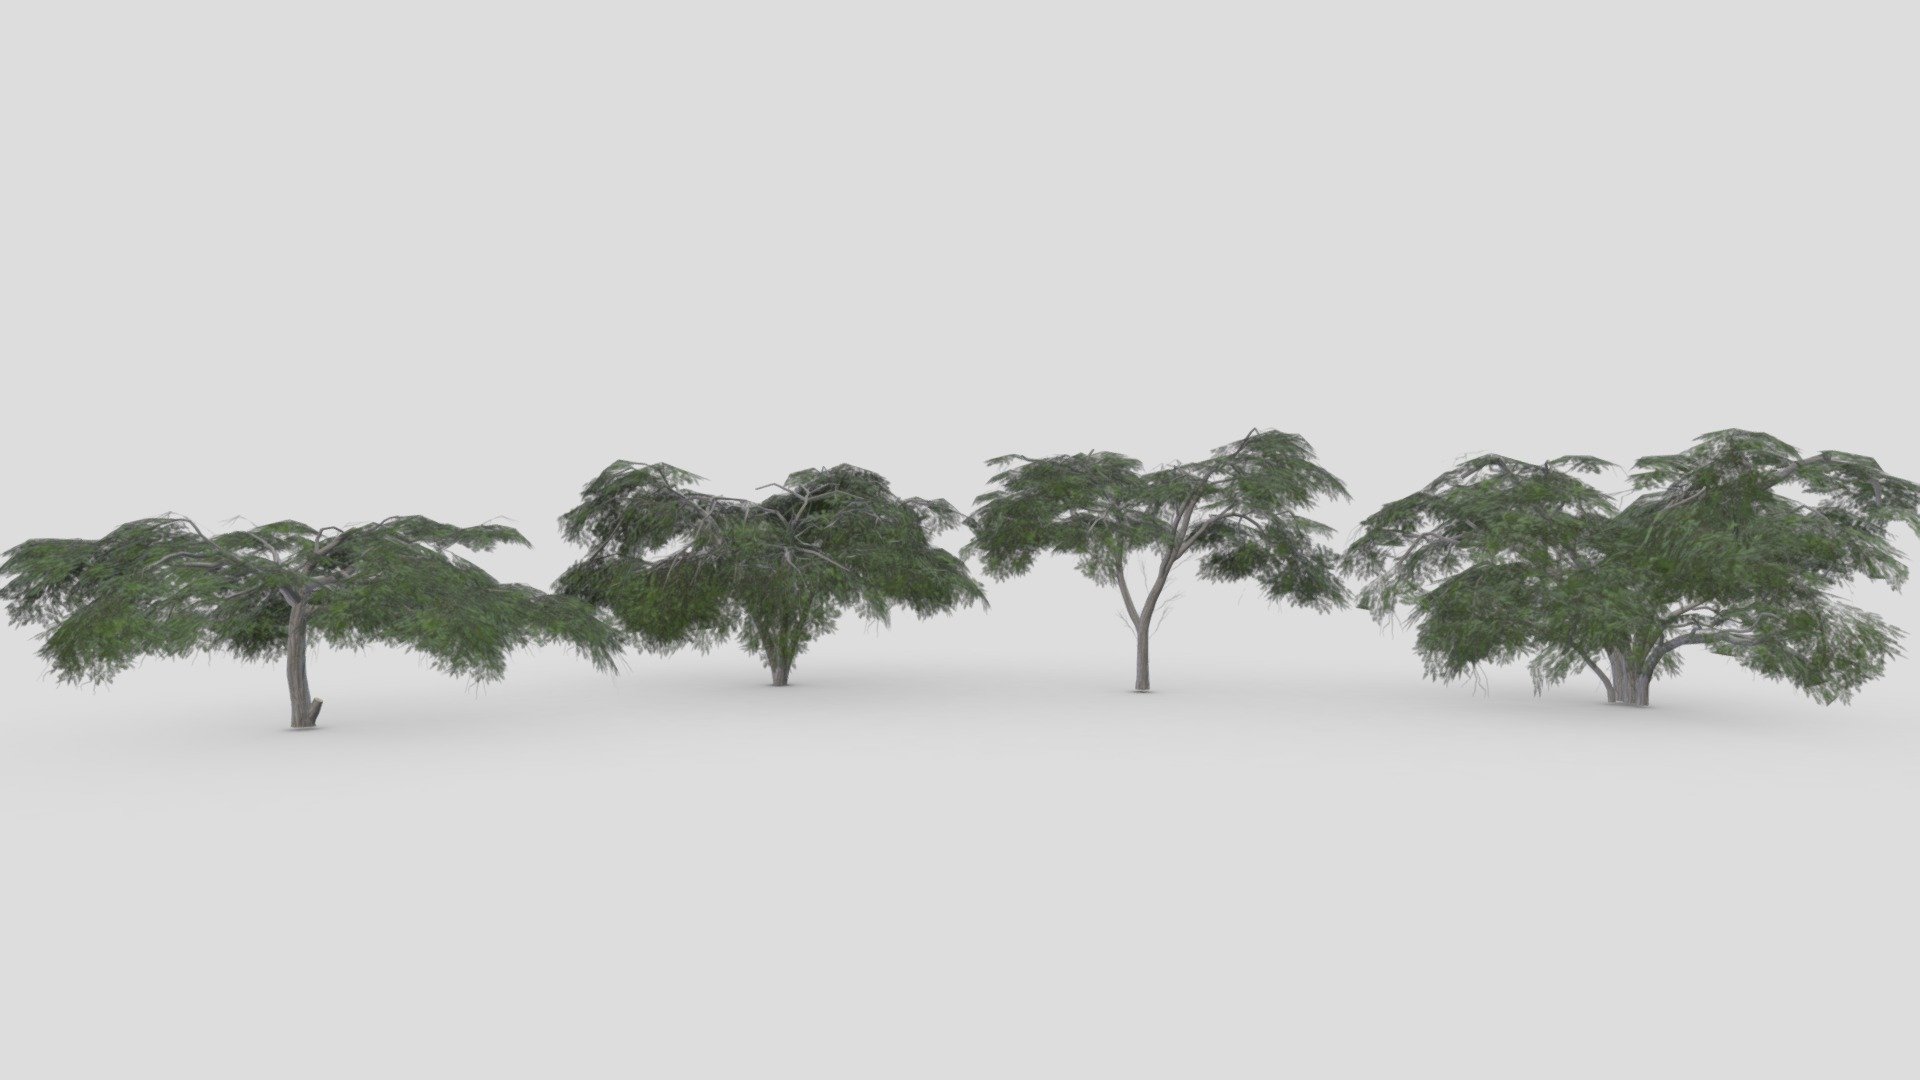 I tried to work on Acacia Tree 3D model. This is a 3D low poly pack of Acacia Tree. This 3D low poly collection contains 4 3D models of Acacia Tree 3d model